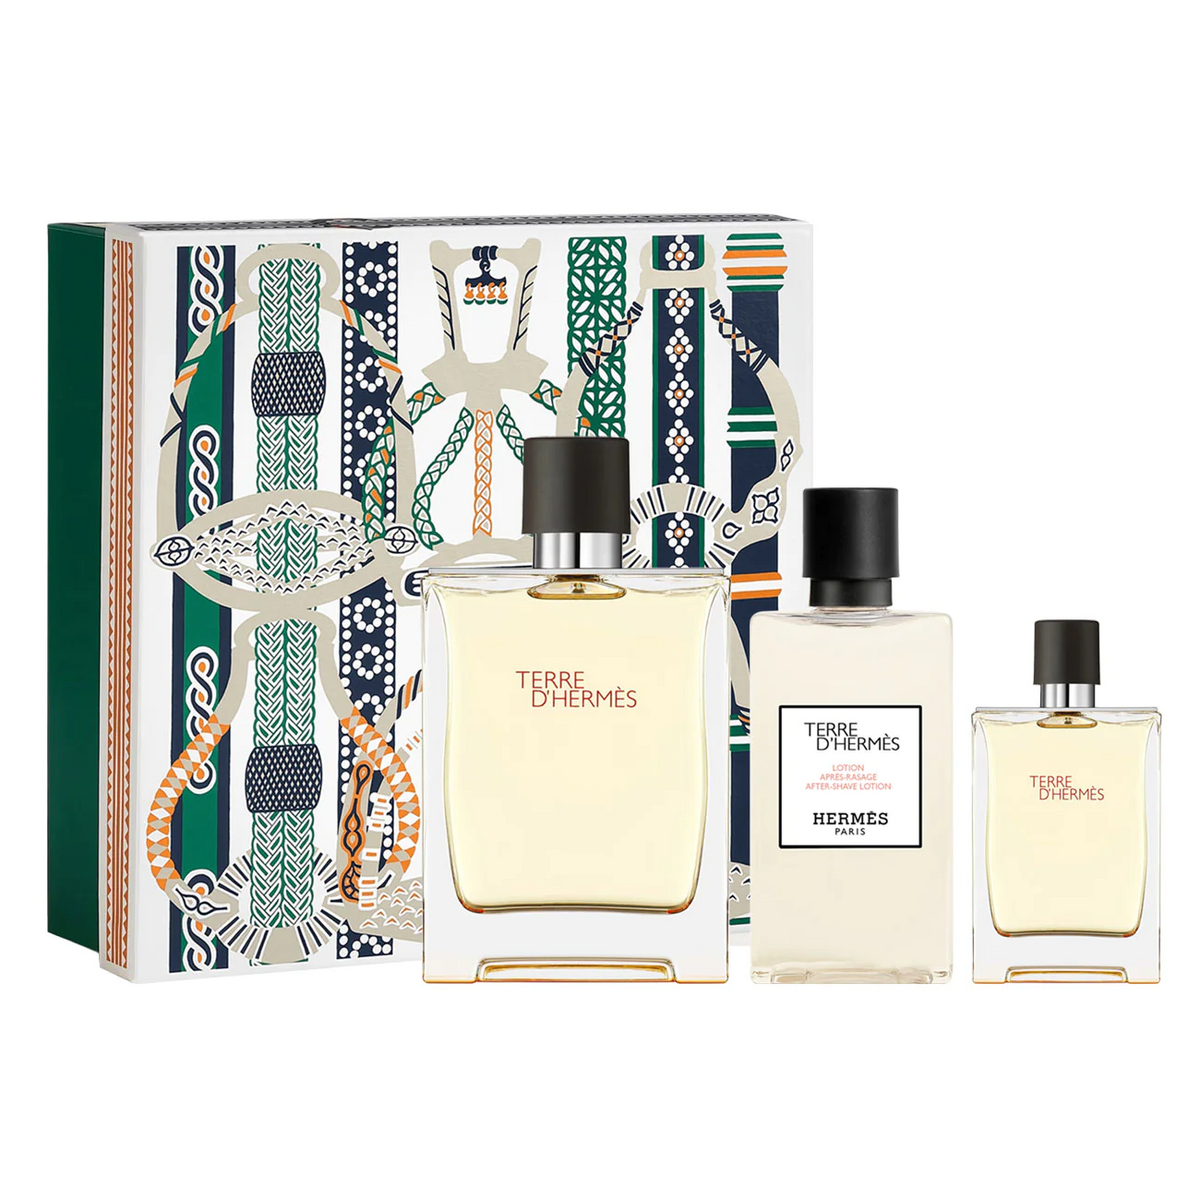 Terre d'Hermes Gift Set EDT 100ml + Mini 12.5ml + 40ml Aftershave Lotion